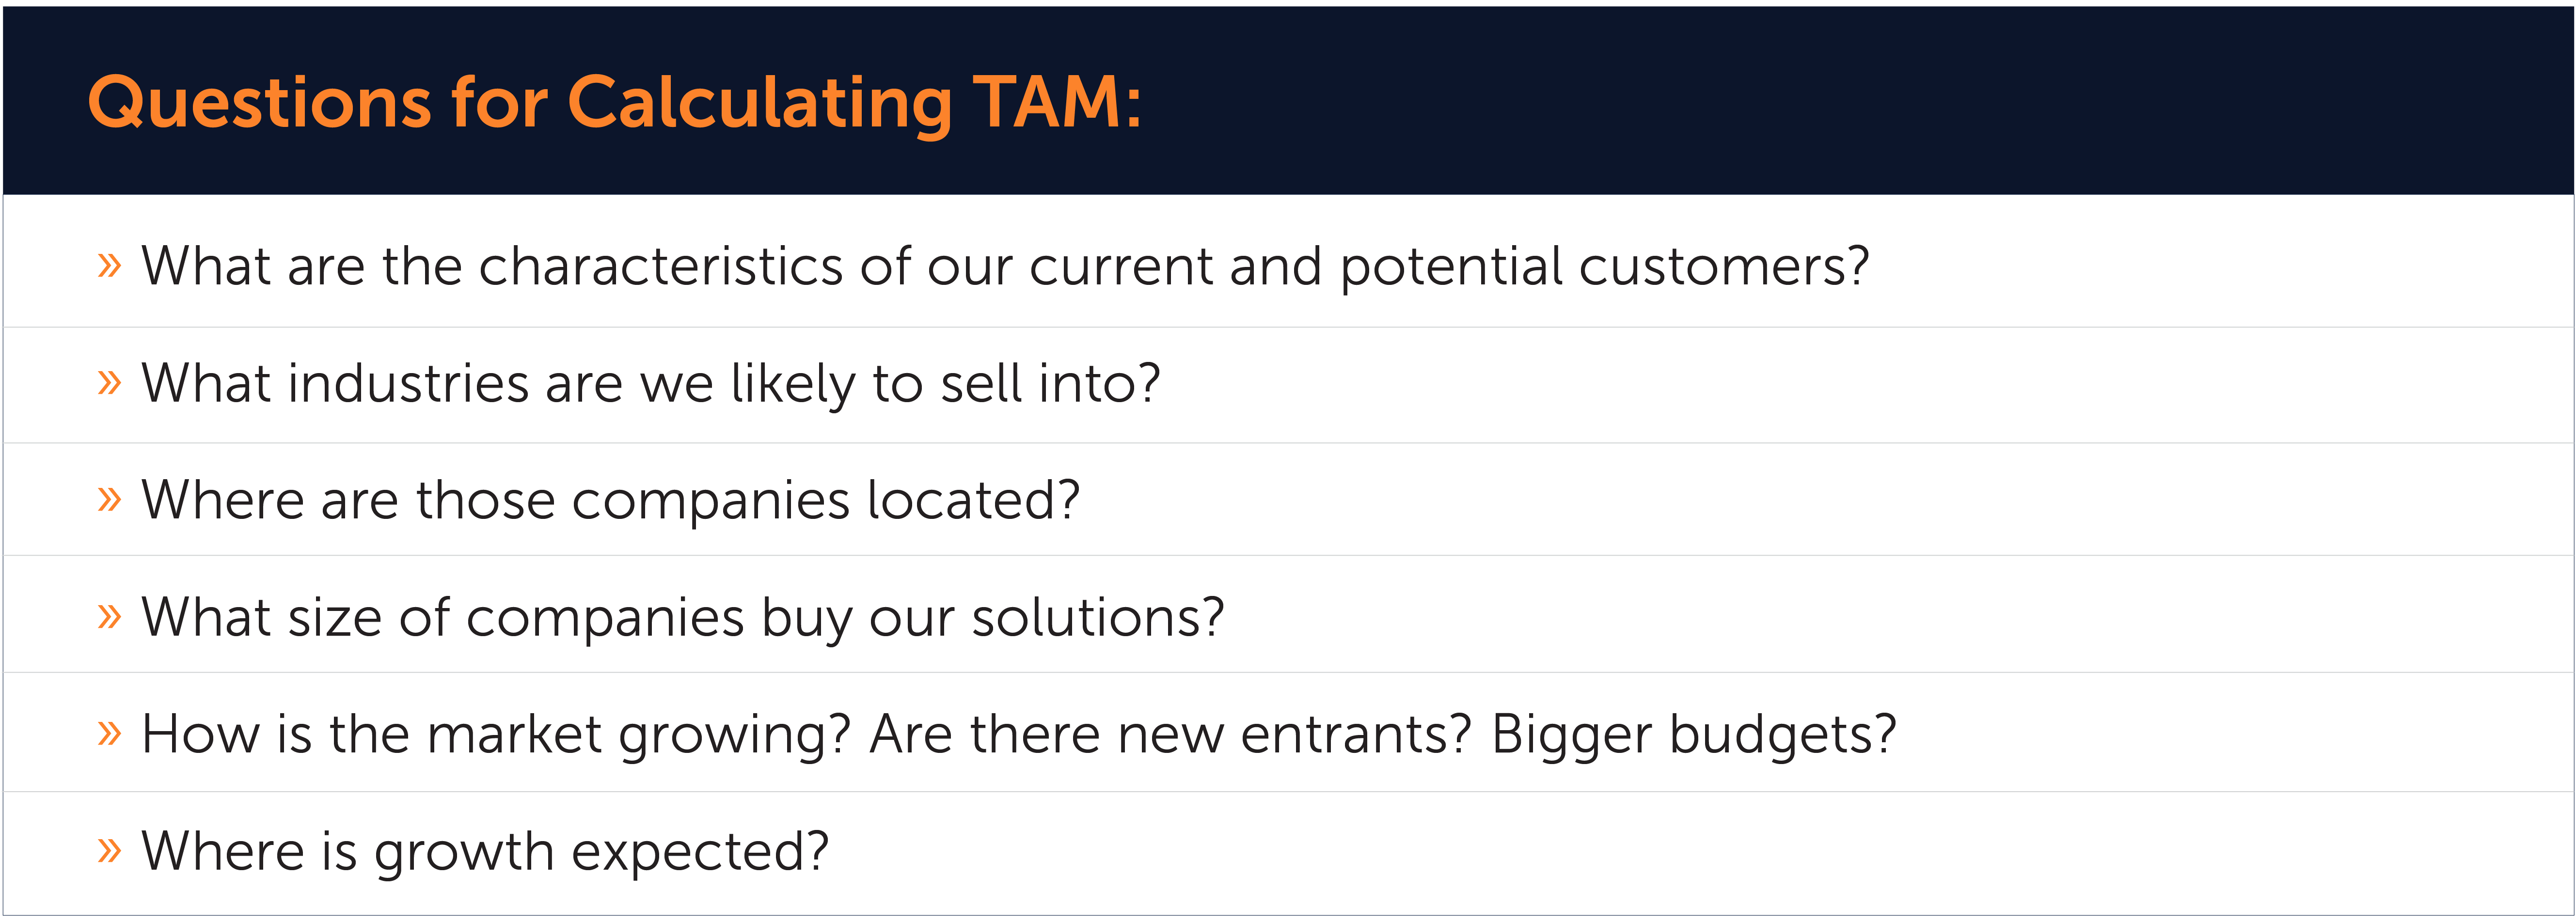 Questions for Calculating TAM